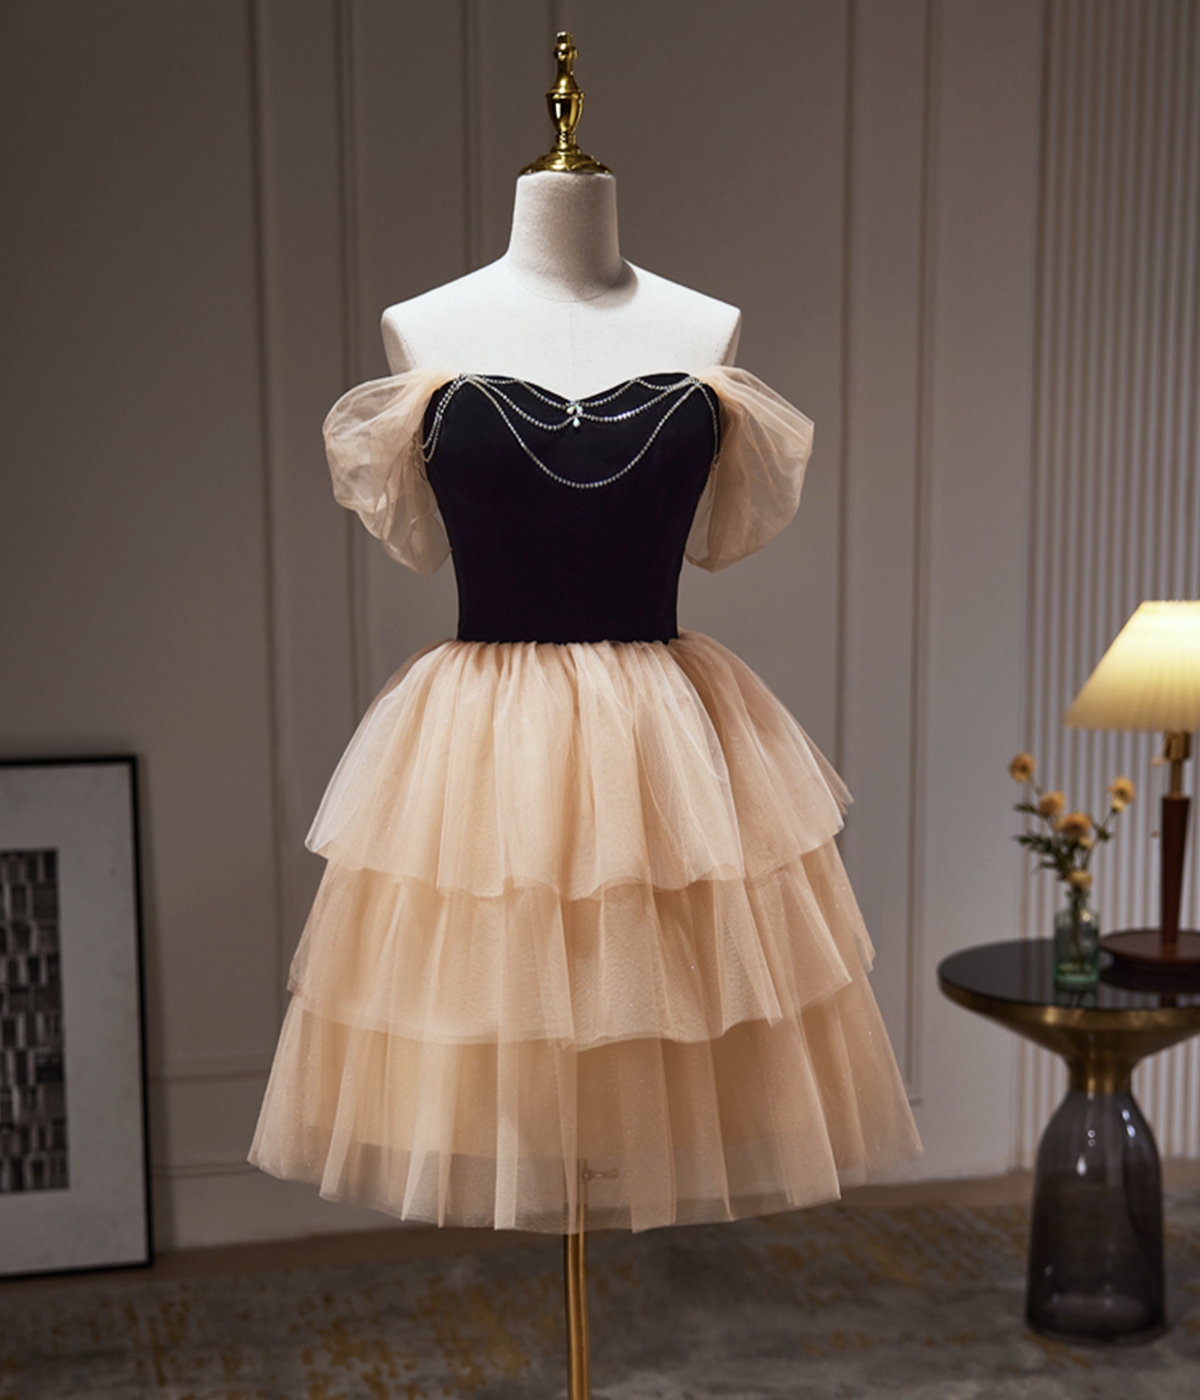 Beauty Black Velvet And Champagne Tiered Tulle Short Homecoming Dress